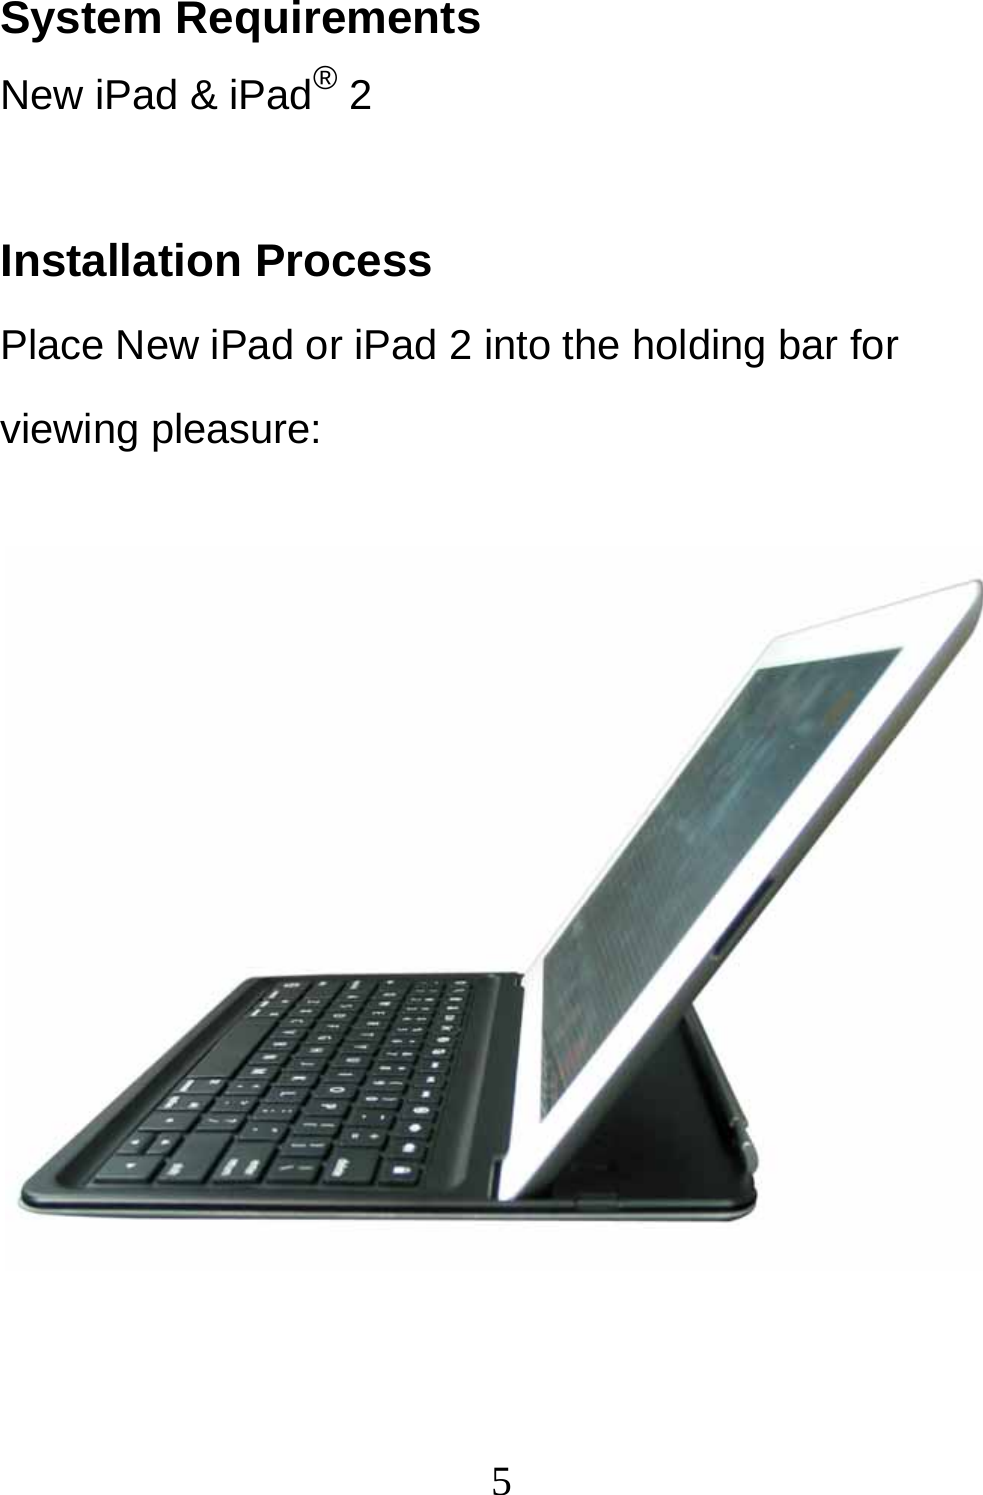  5System Requirements New iPad &amp; iPad® 2  Installation Process Place New iPad or iPad 2 into the holding bar for viewing pleasure:             